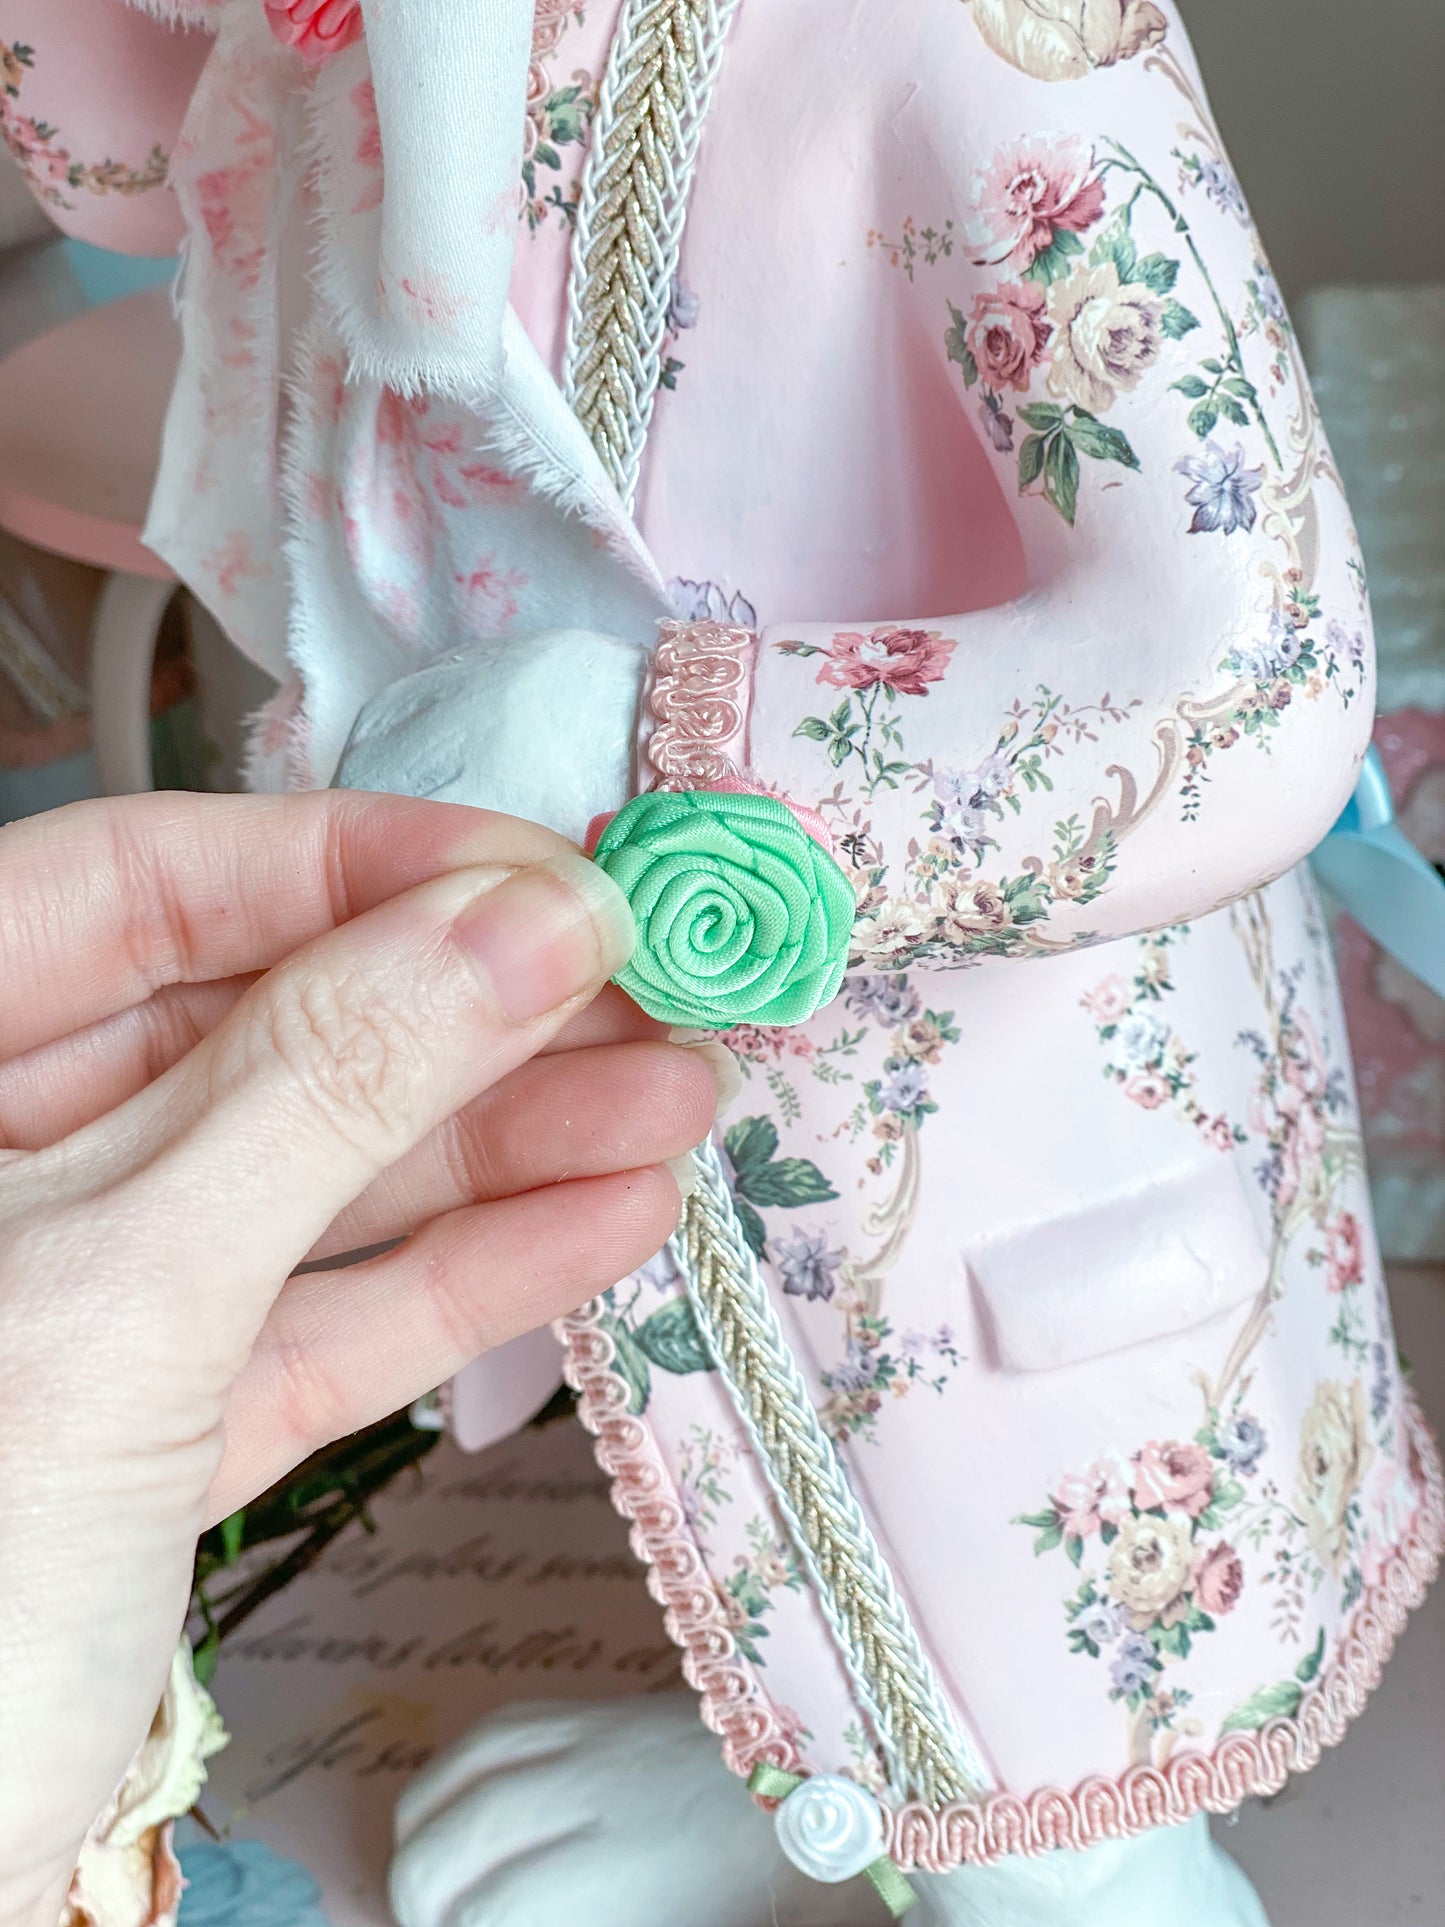 Bespoke Pastel Pink Rococo French Dandy Bunny with Brocade Style Jacket